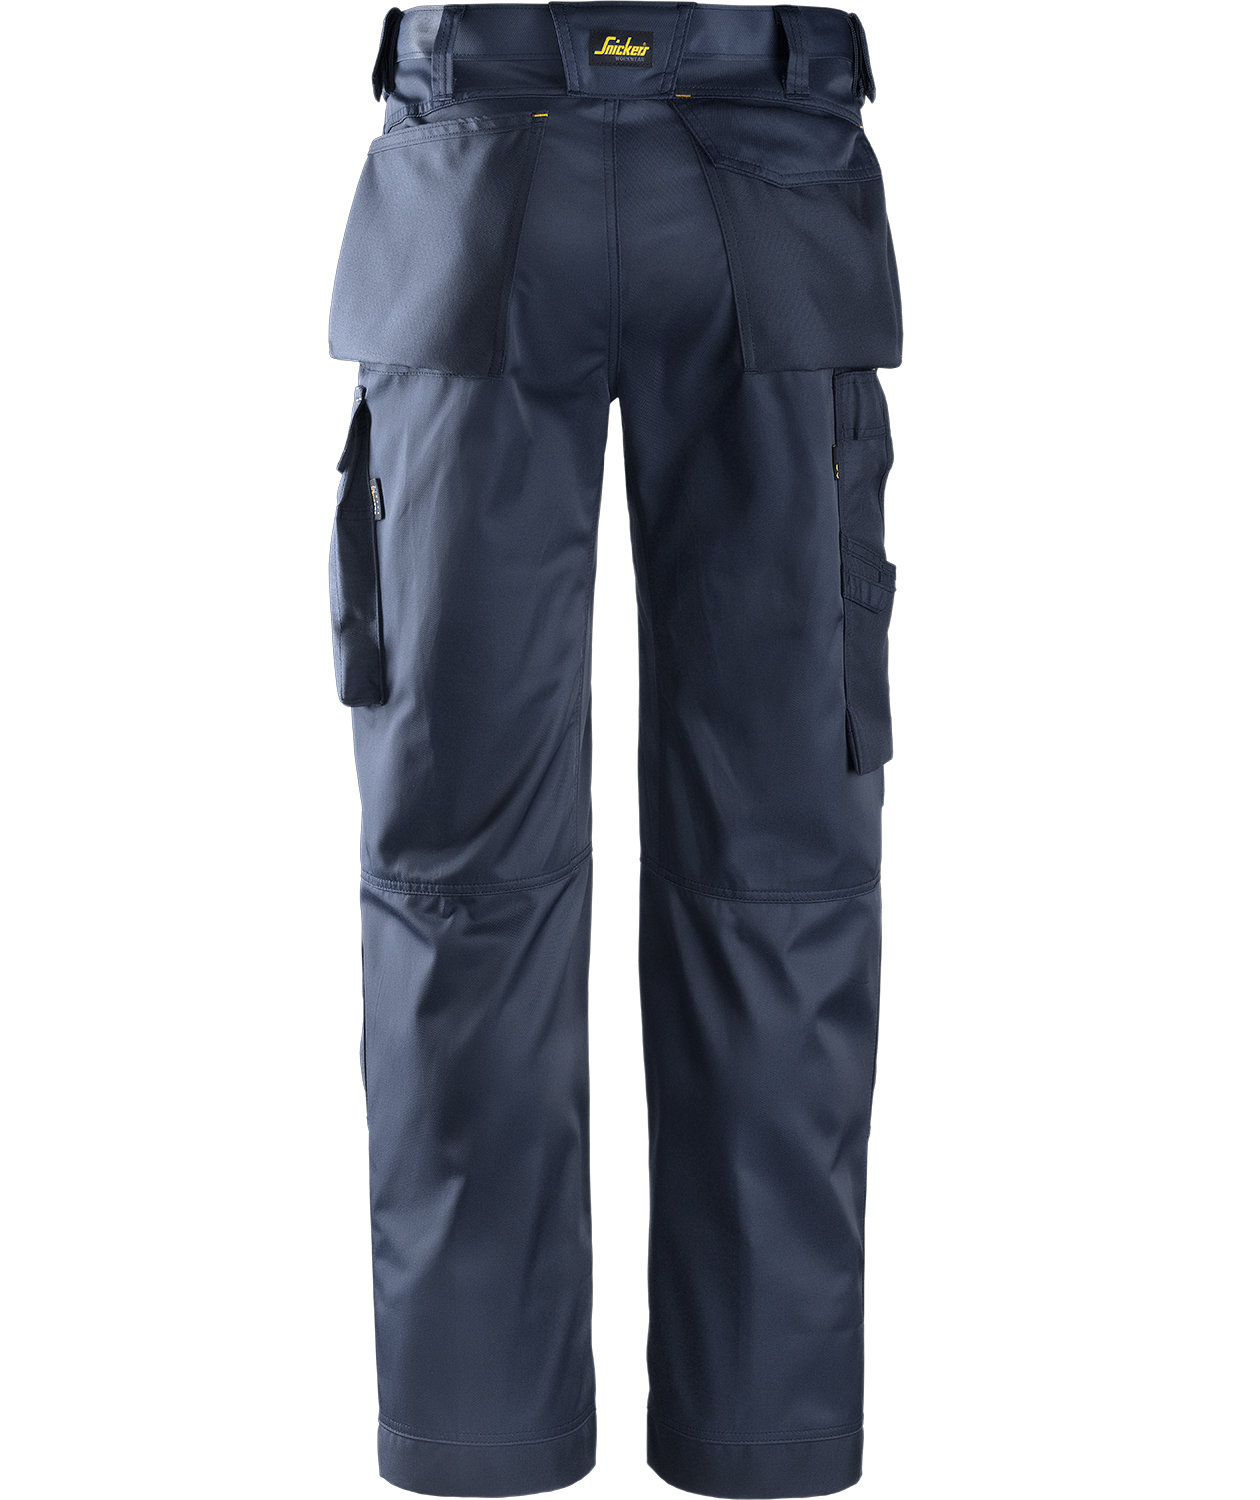 Buy Snickers FlexiWork service trousers 6873 full stretch at Cheap-workwear .com